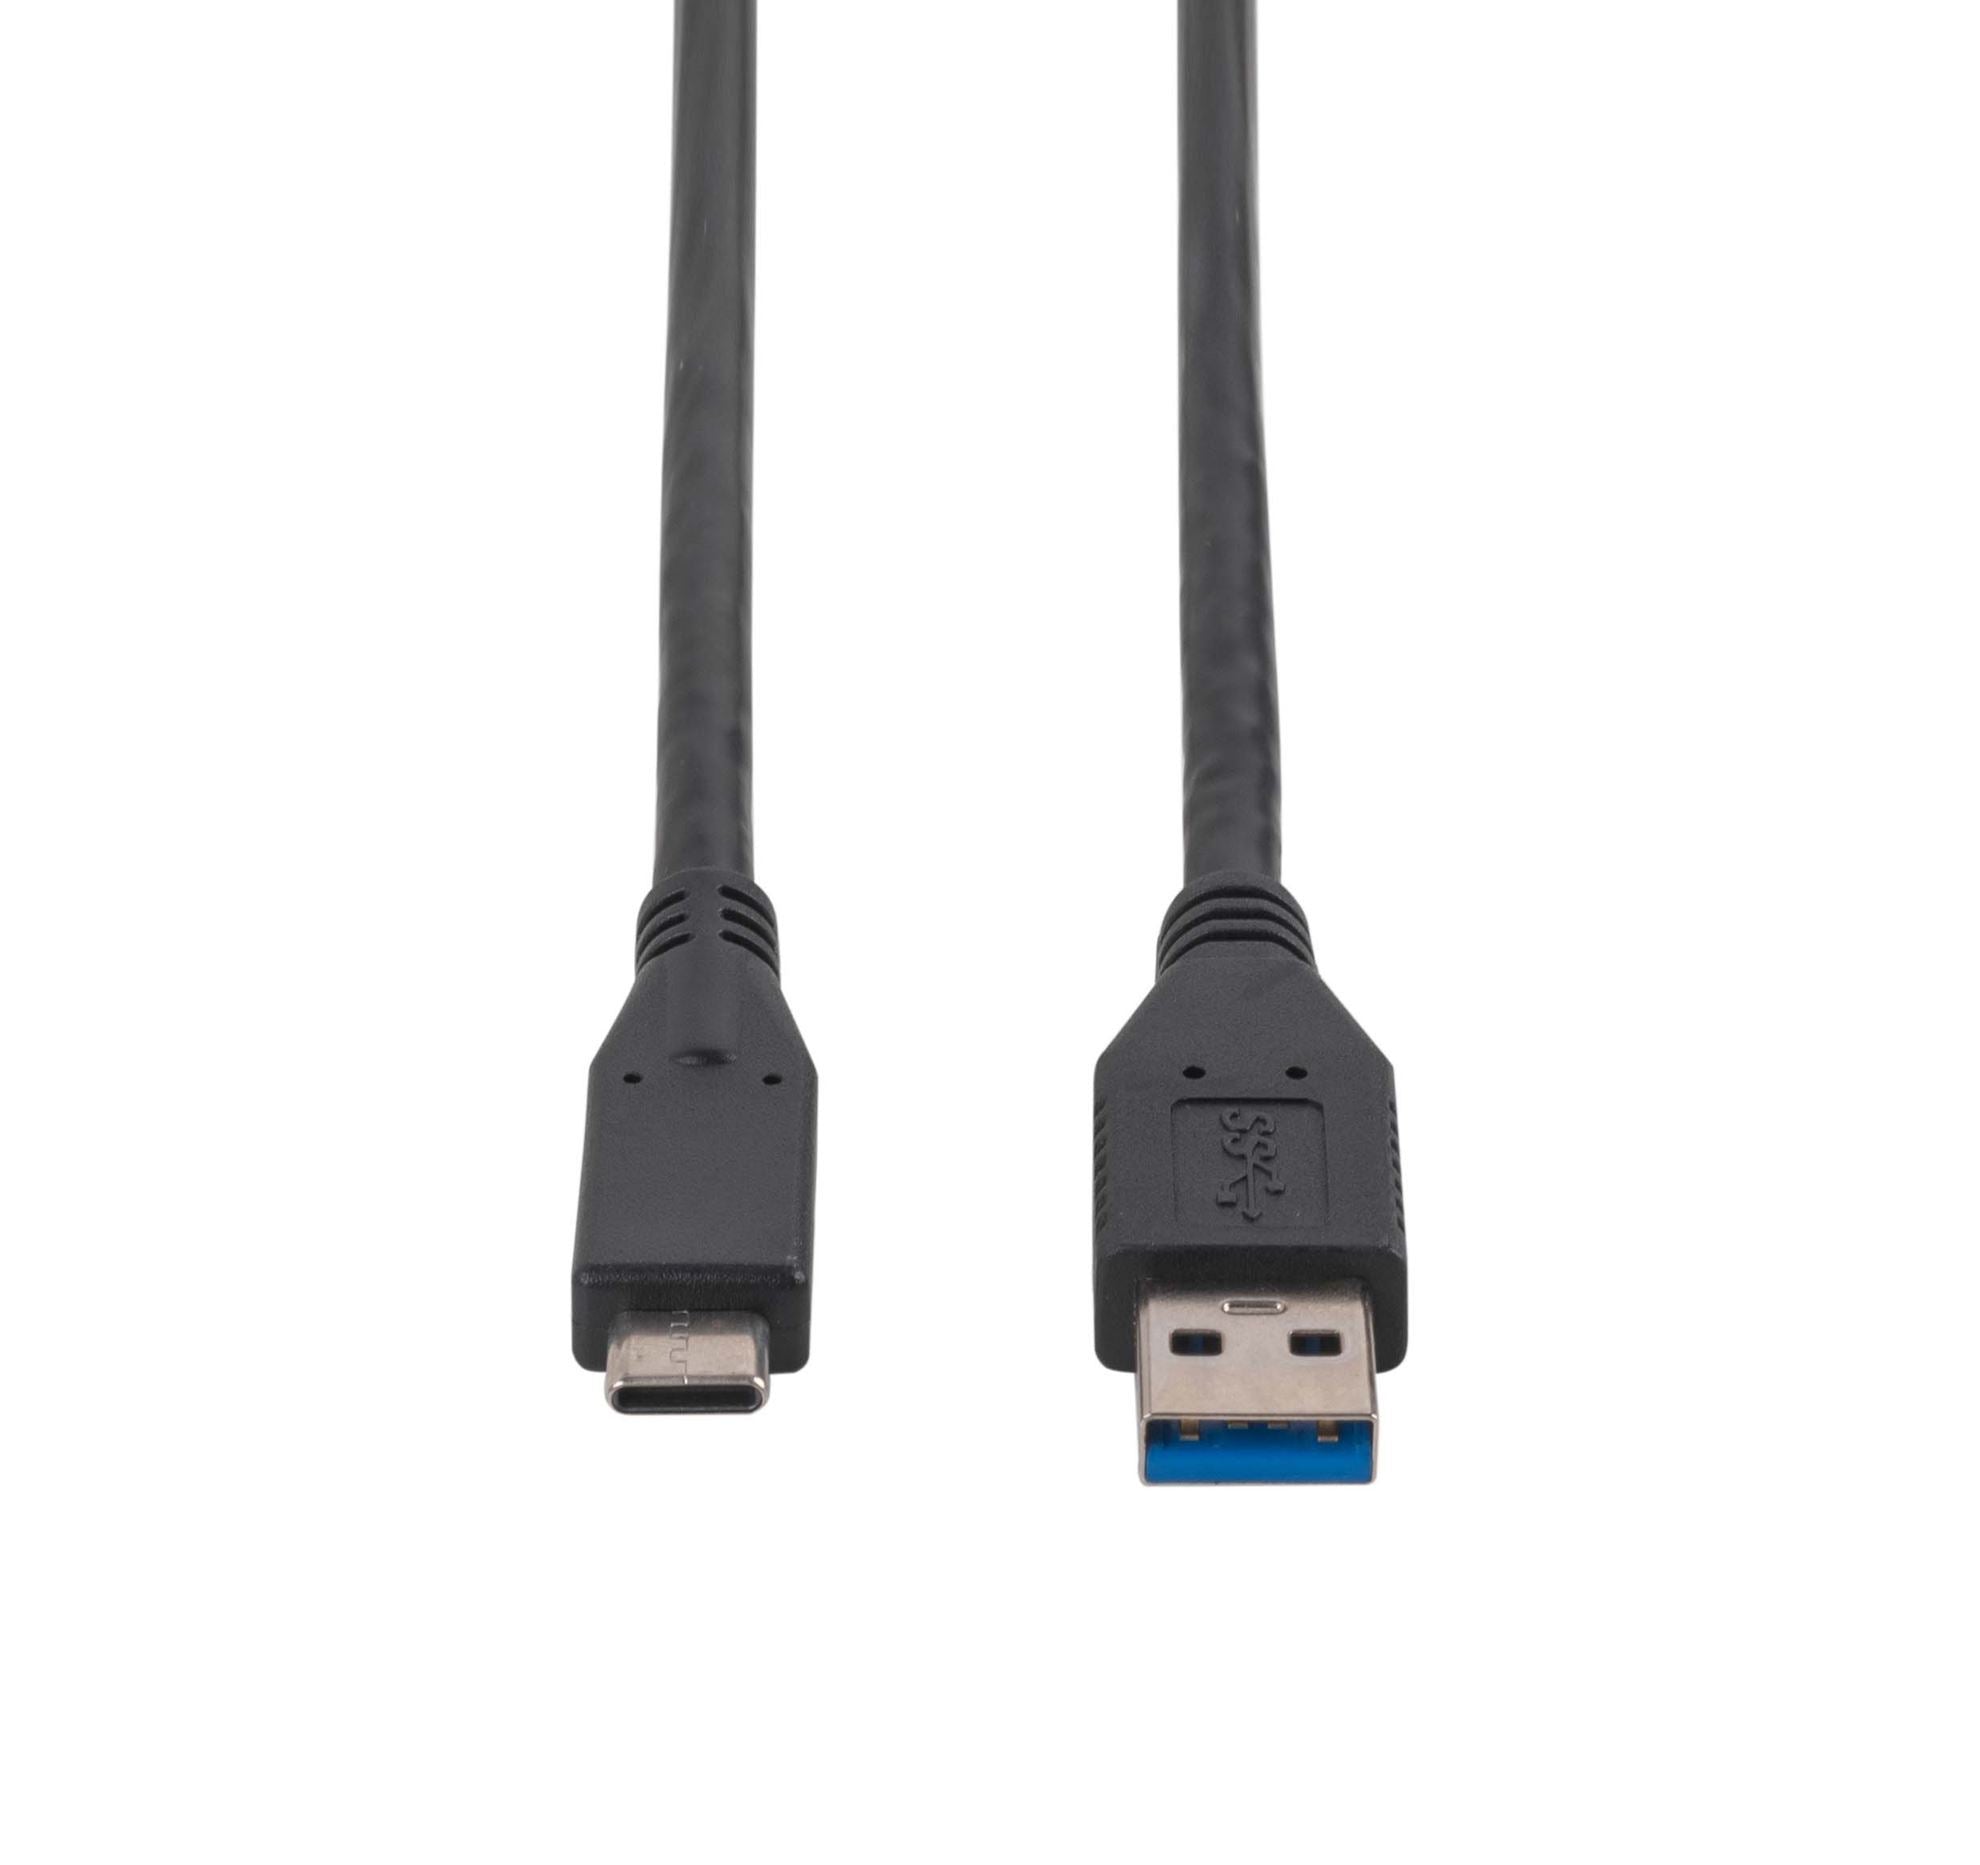 DYNAMIX_3M,_USB_3.1_USB-C_Male_to_USB-A_Male_Cable._Black_Colour._Up_to_10G_Data_Transfer_Speed,_Supports_3A_Current. 1143